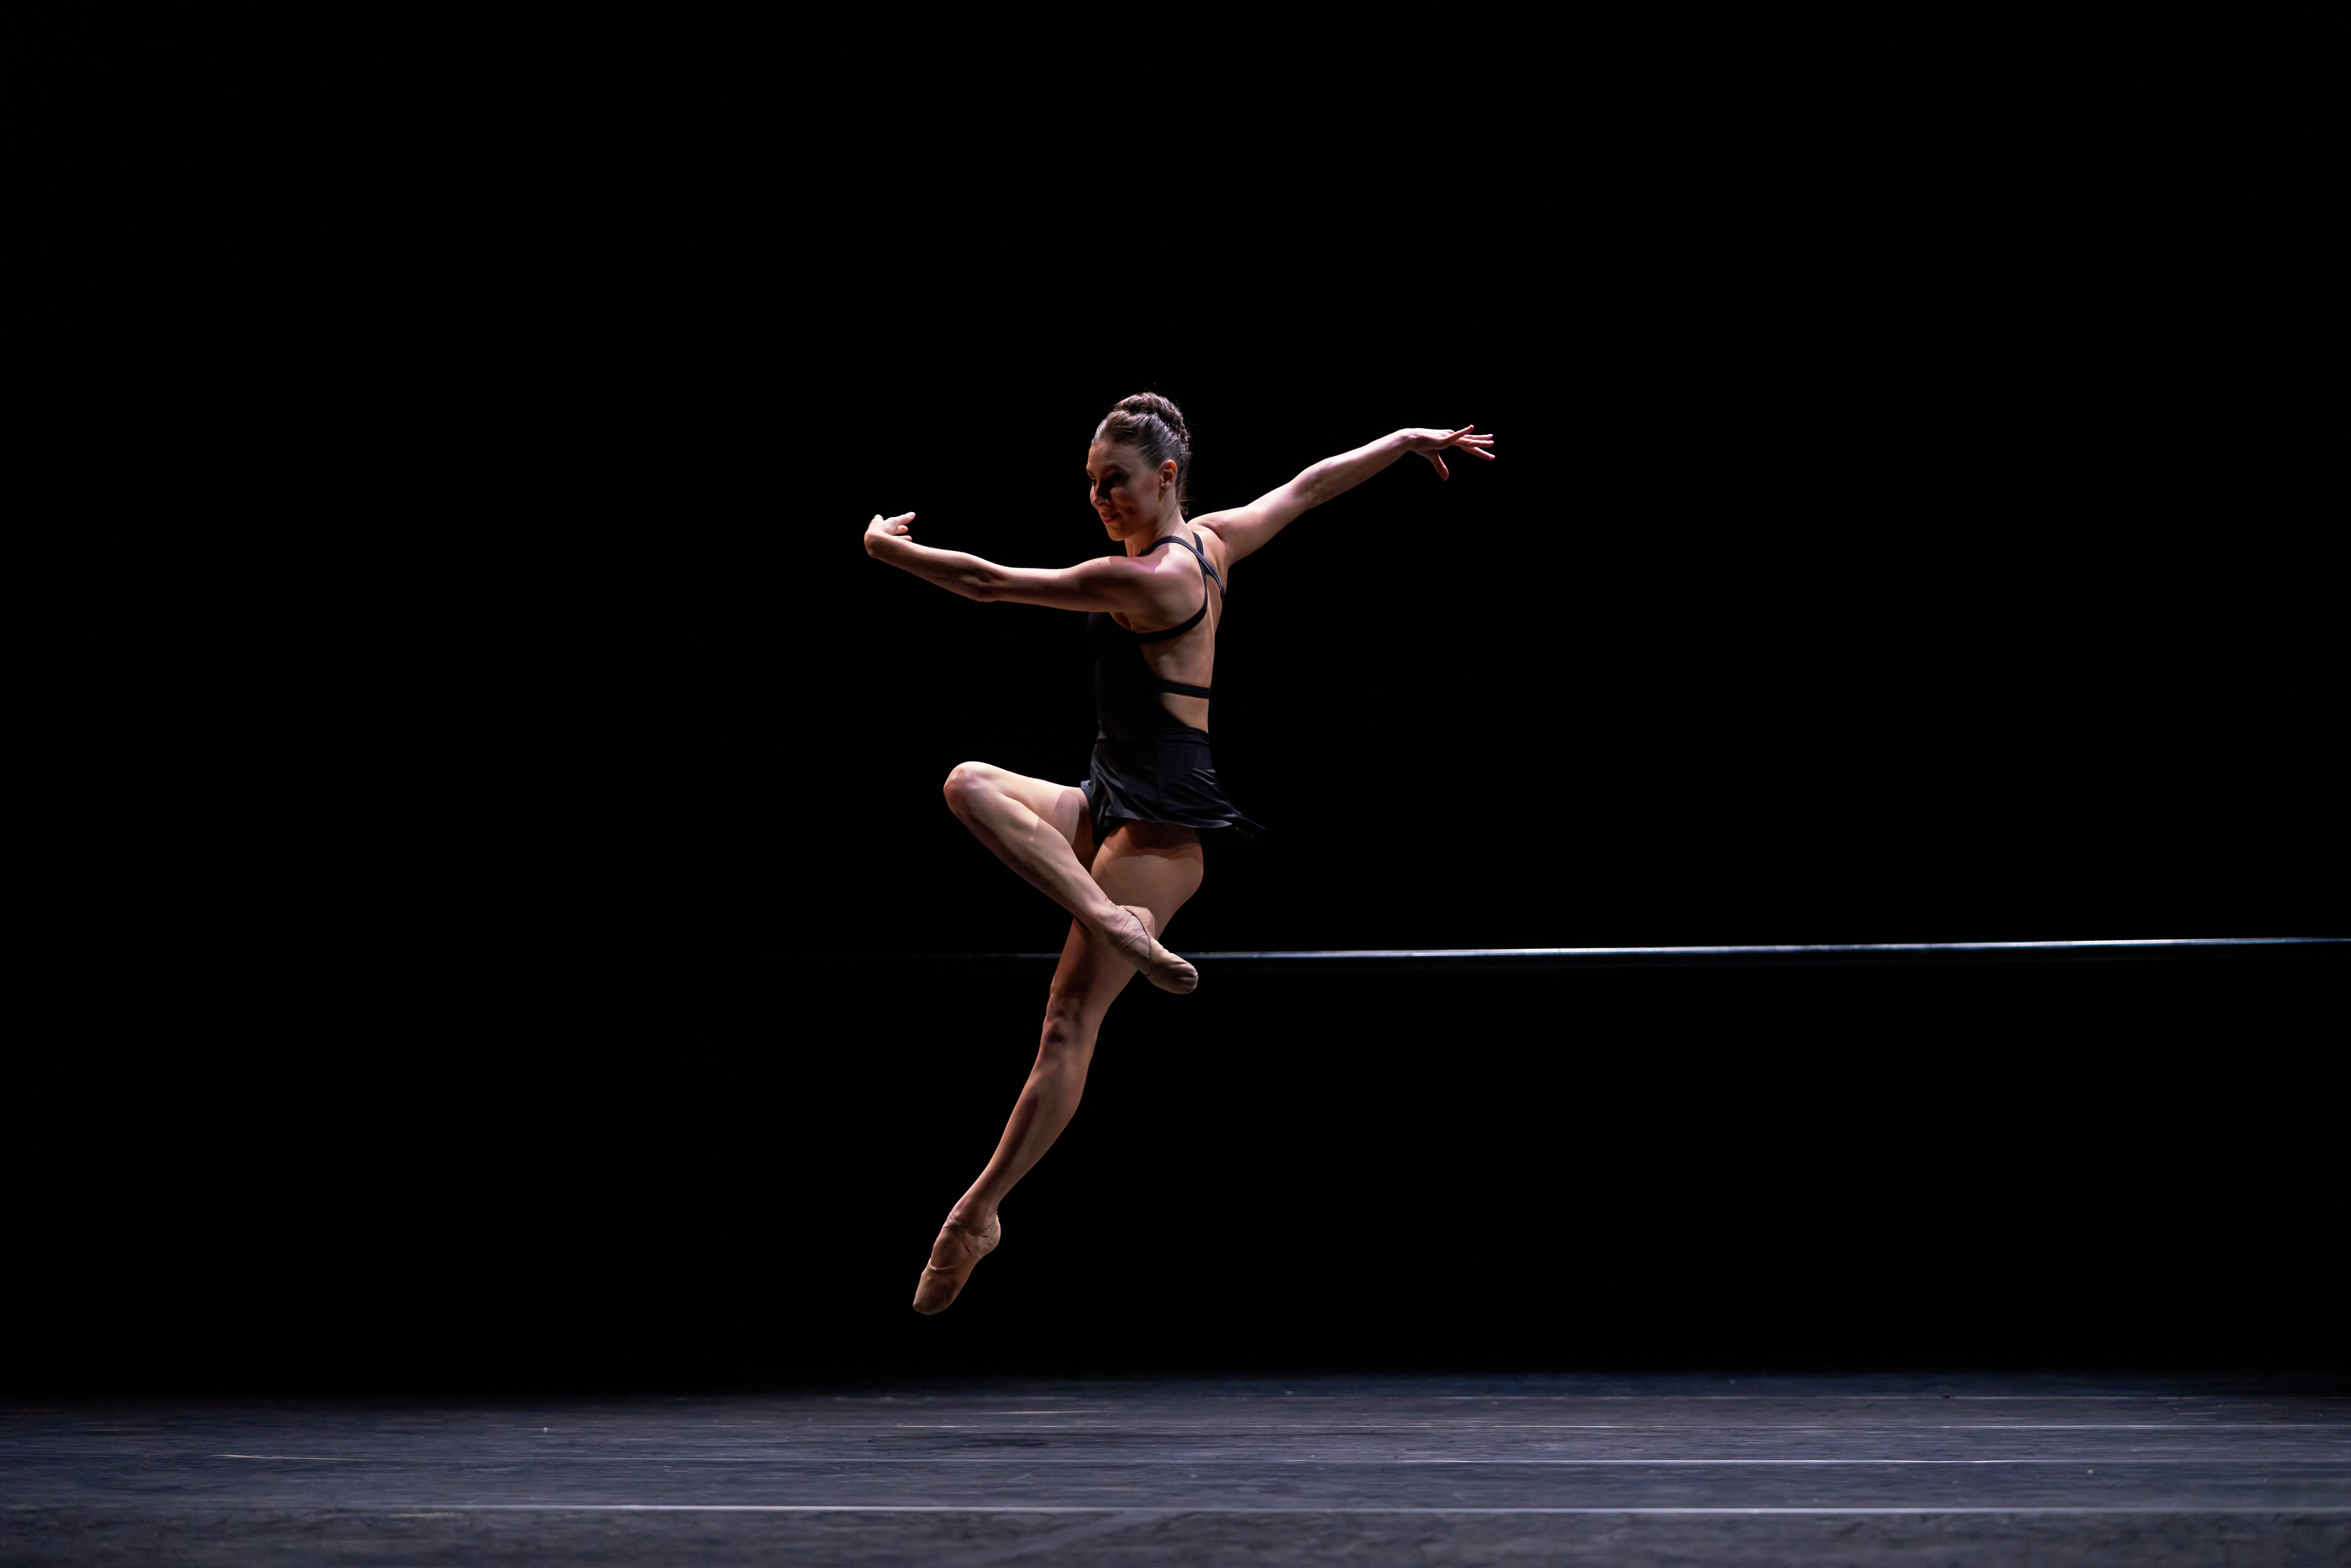 Image of ballerina Tiler Peck in a jump on stage